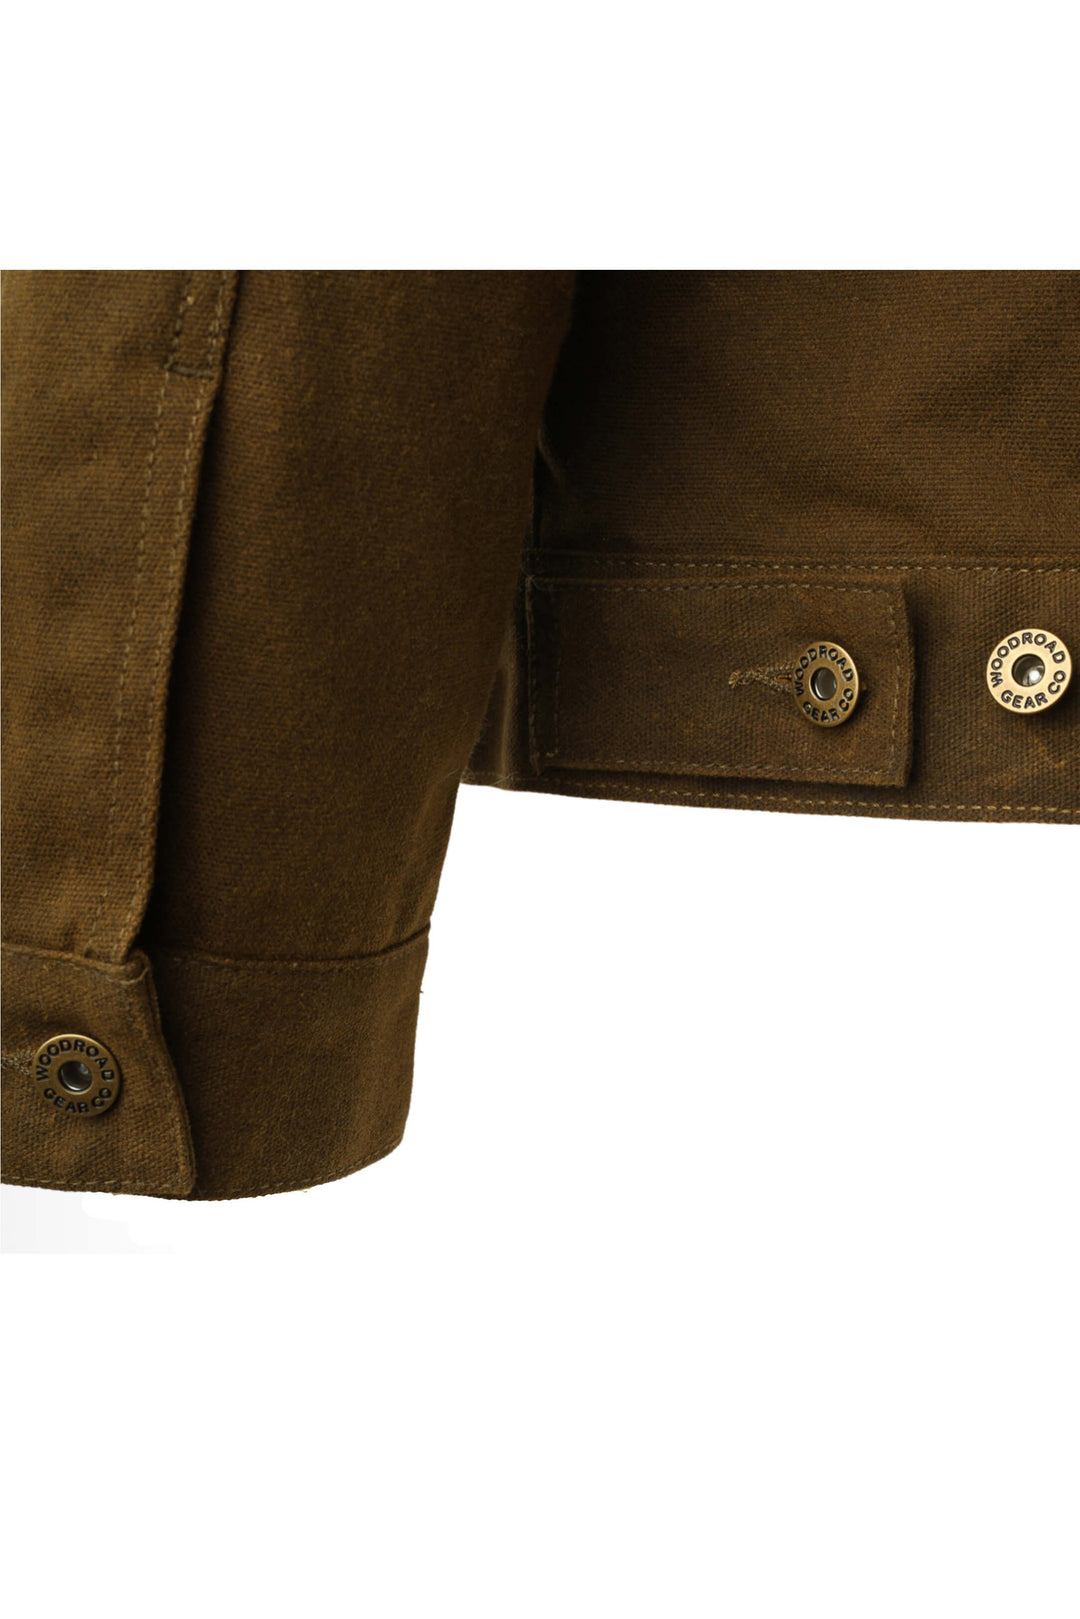 Ranch Hand Waxed Jacket - Buttons - Woodroad Gear Co.